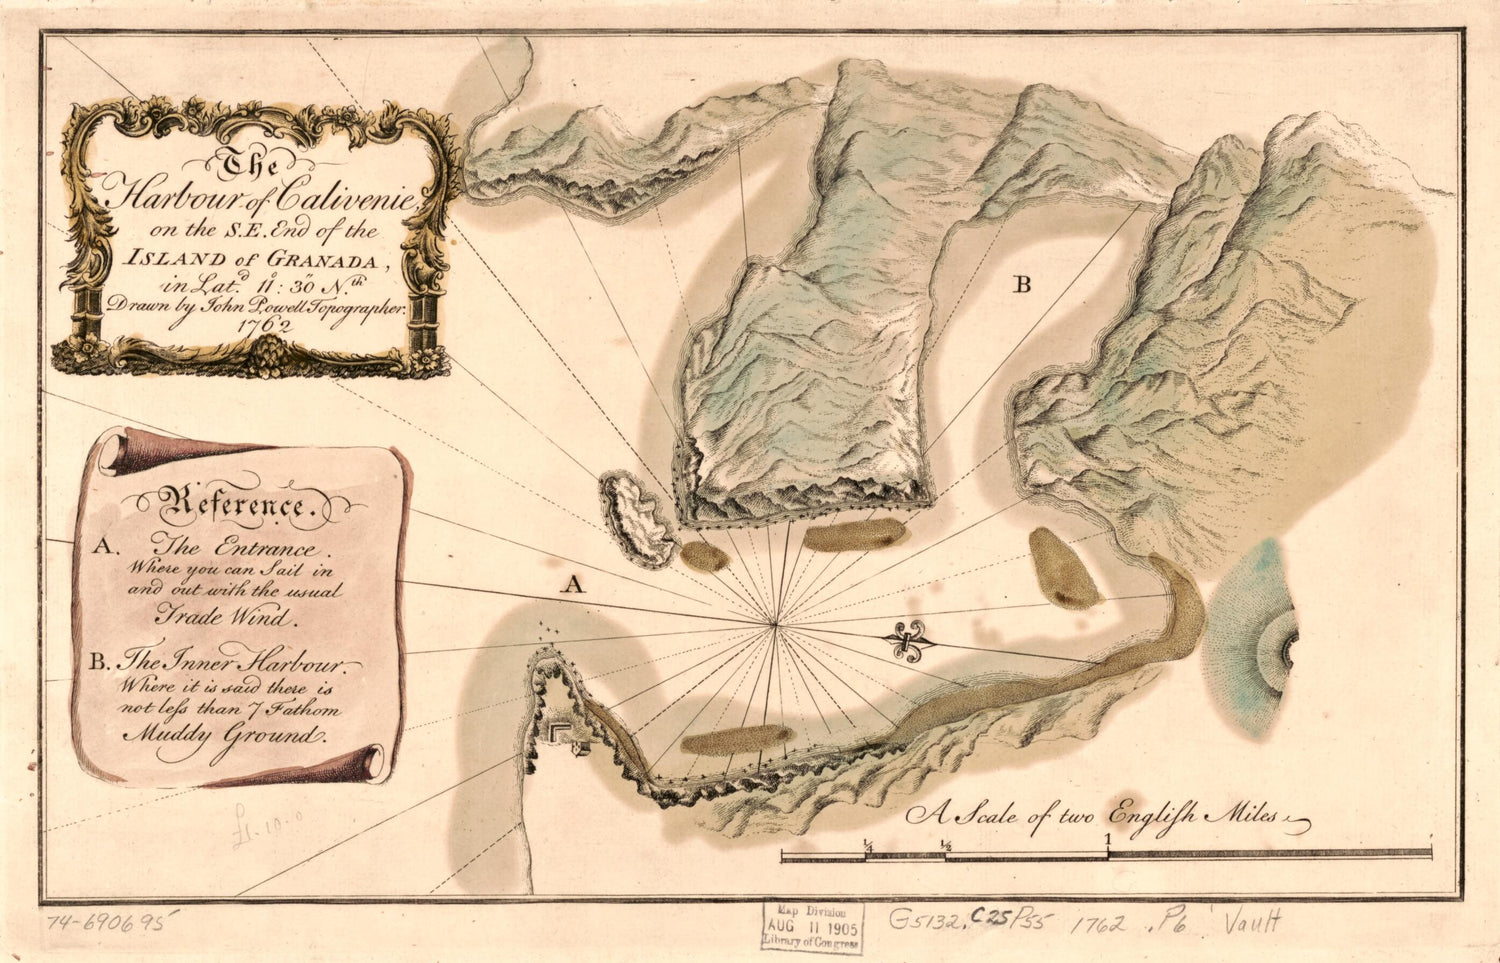 This old map of The Harbour of Calivenie On the S.E. End of the Island of Granada : In Latd. 11⁰:30ʺ Nth from 1762 was created by John Powell in 1762